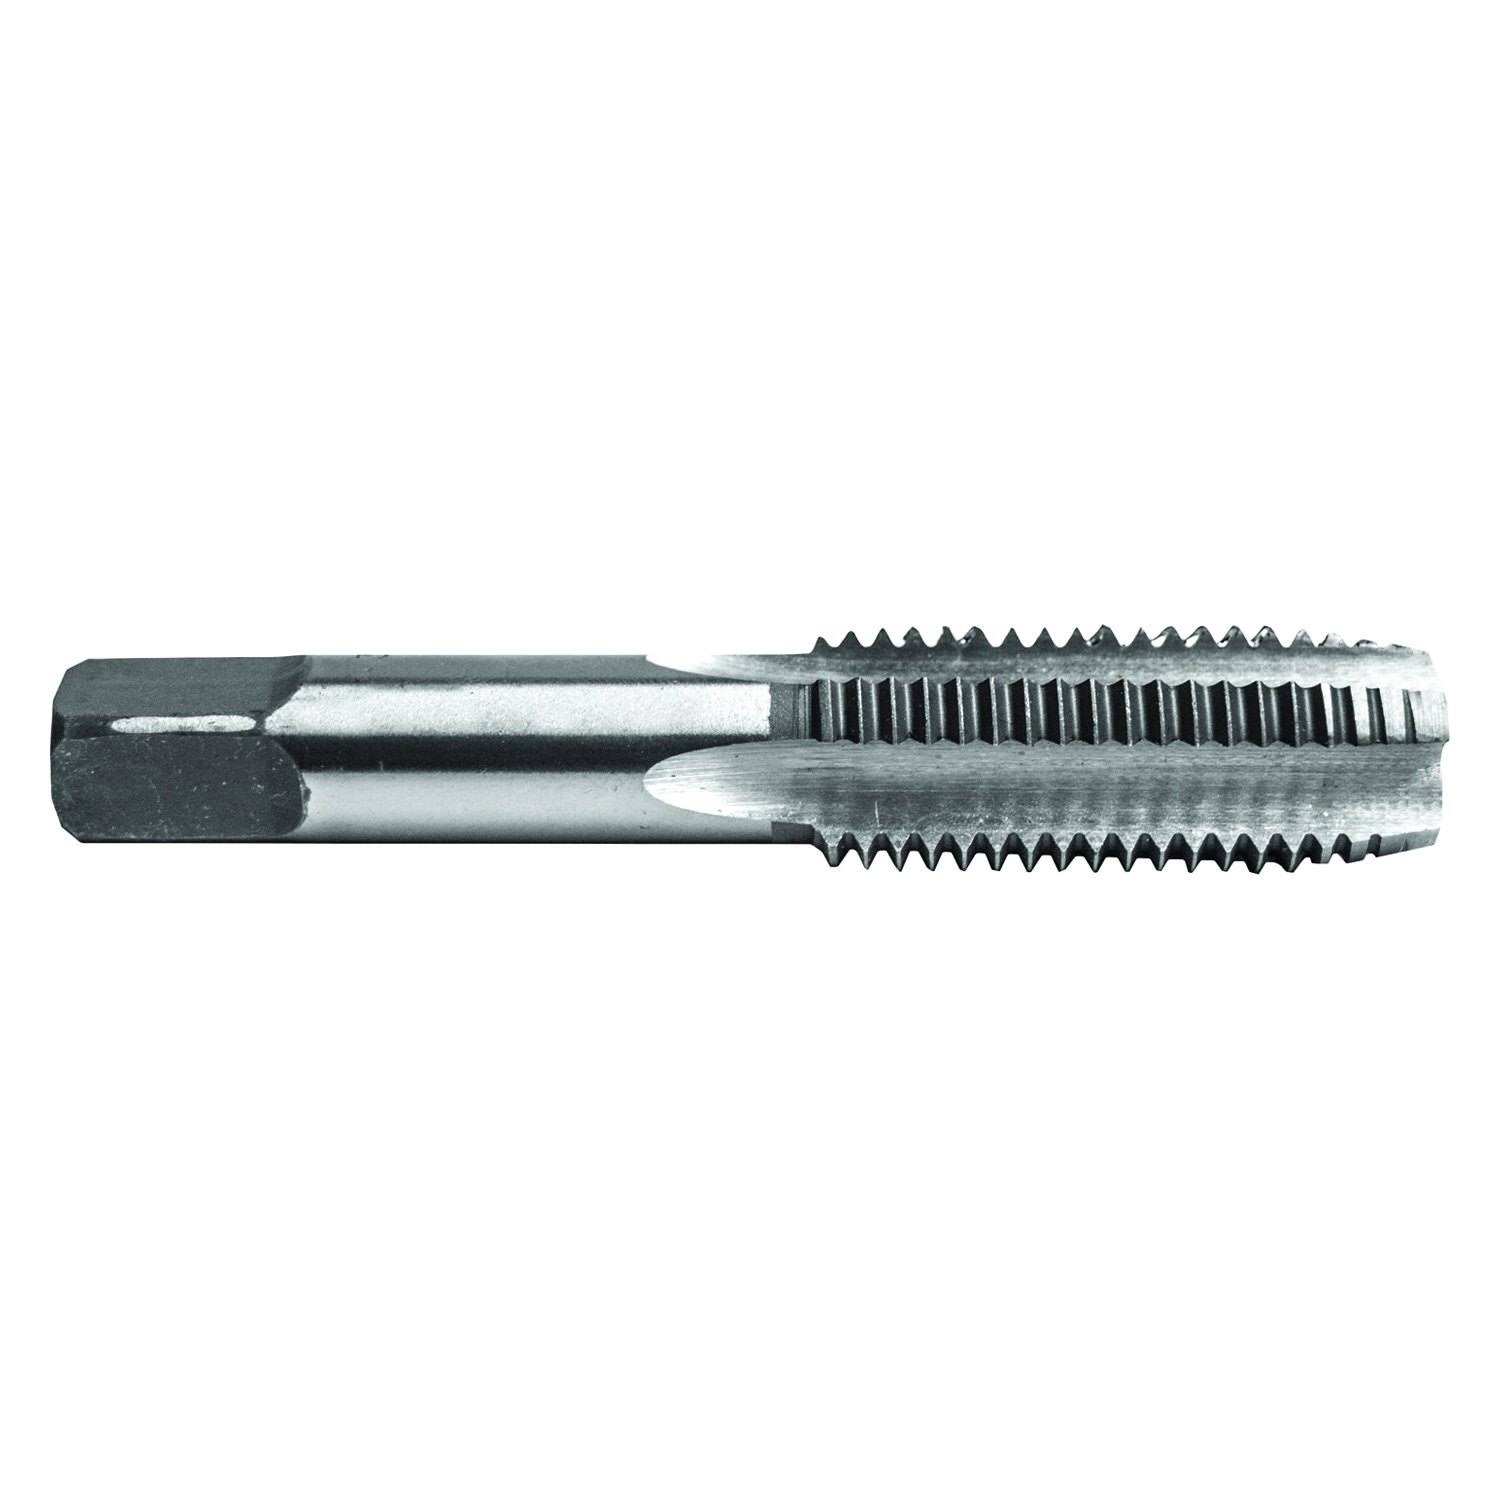 (7/8-9 NC) - Century Drill and Tool 97119 Carbon Steel Plug Tap,7/8-9 NC G4074850